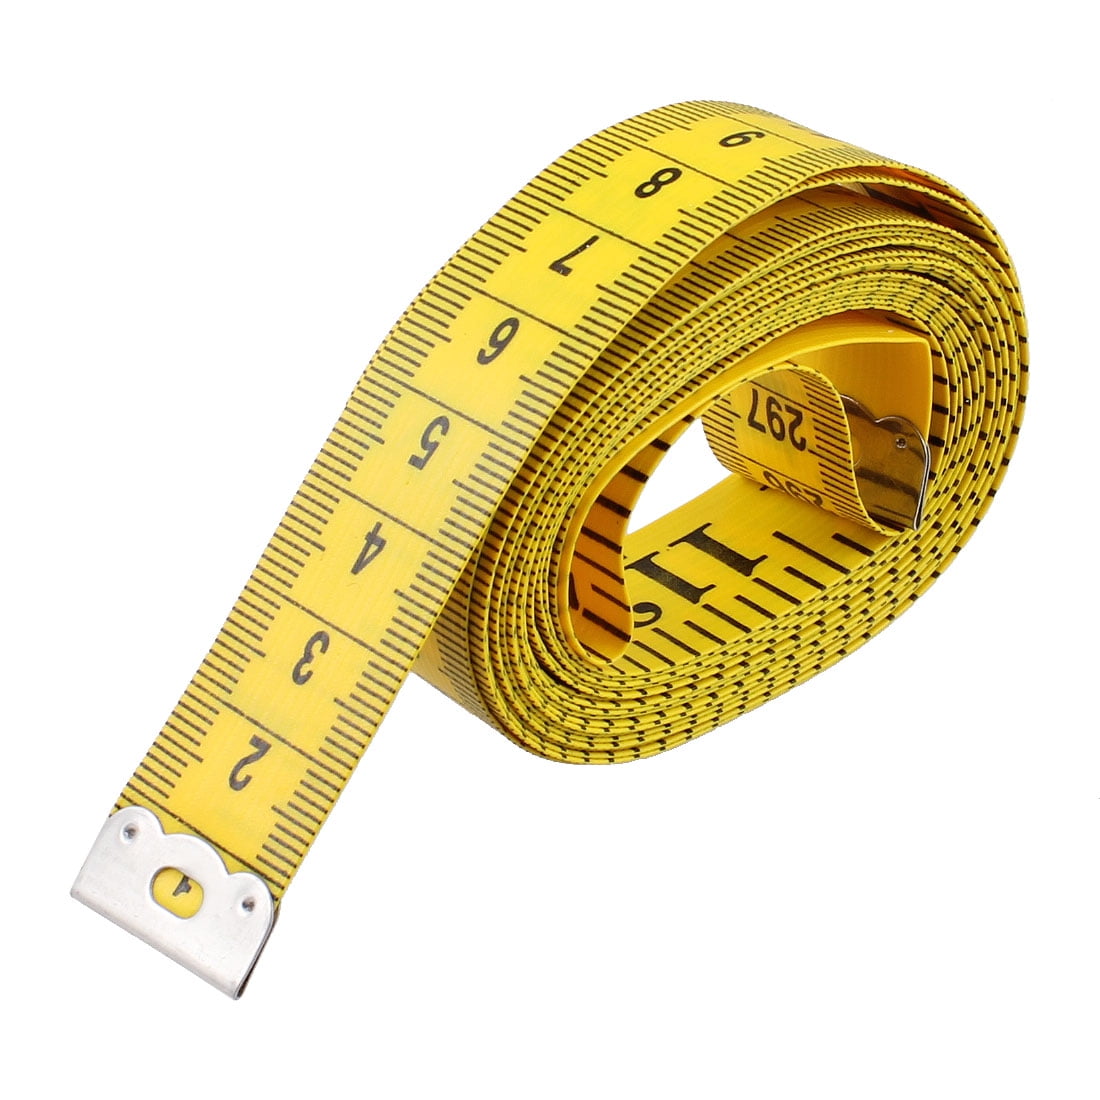 Fanala New Body Soft Flat Measure Ruler Sewing Cloth Tailor Measuring Tape Tape Measures